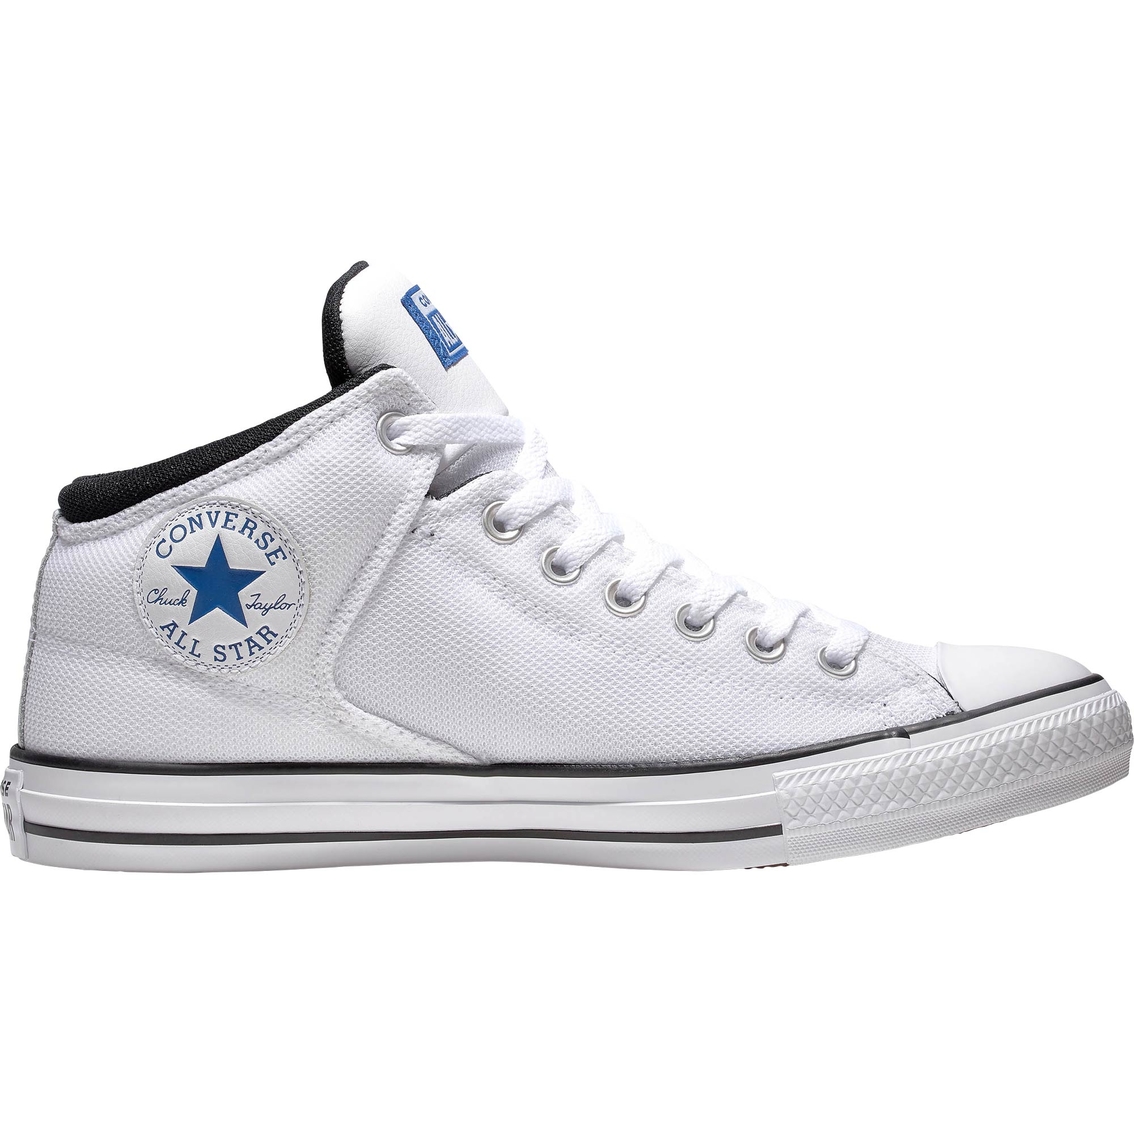 Converse Men's All Star High Street High Top Shoes | Sneakers | Shoes ...